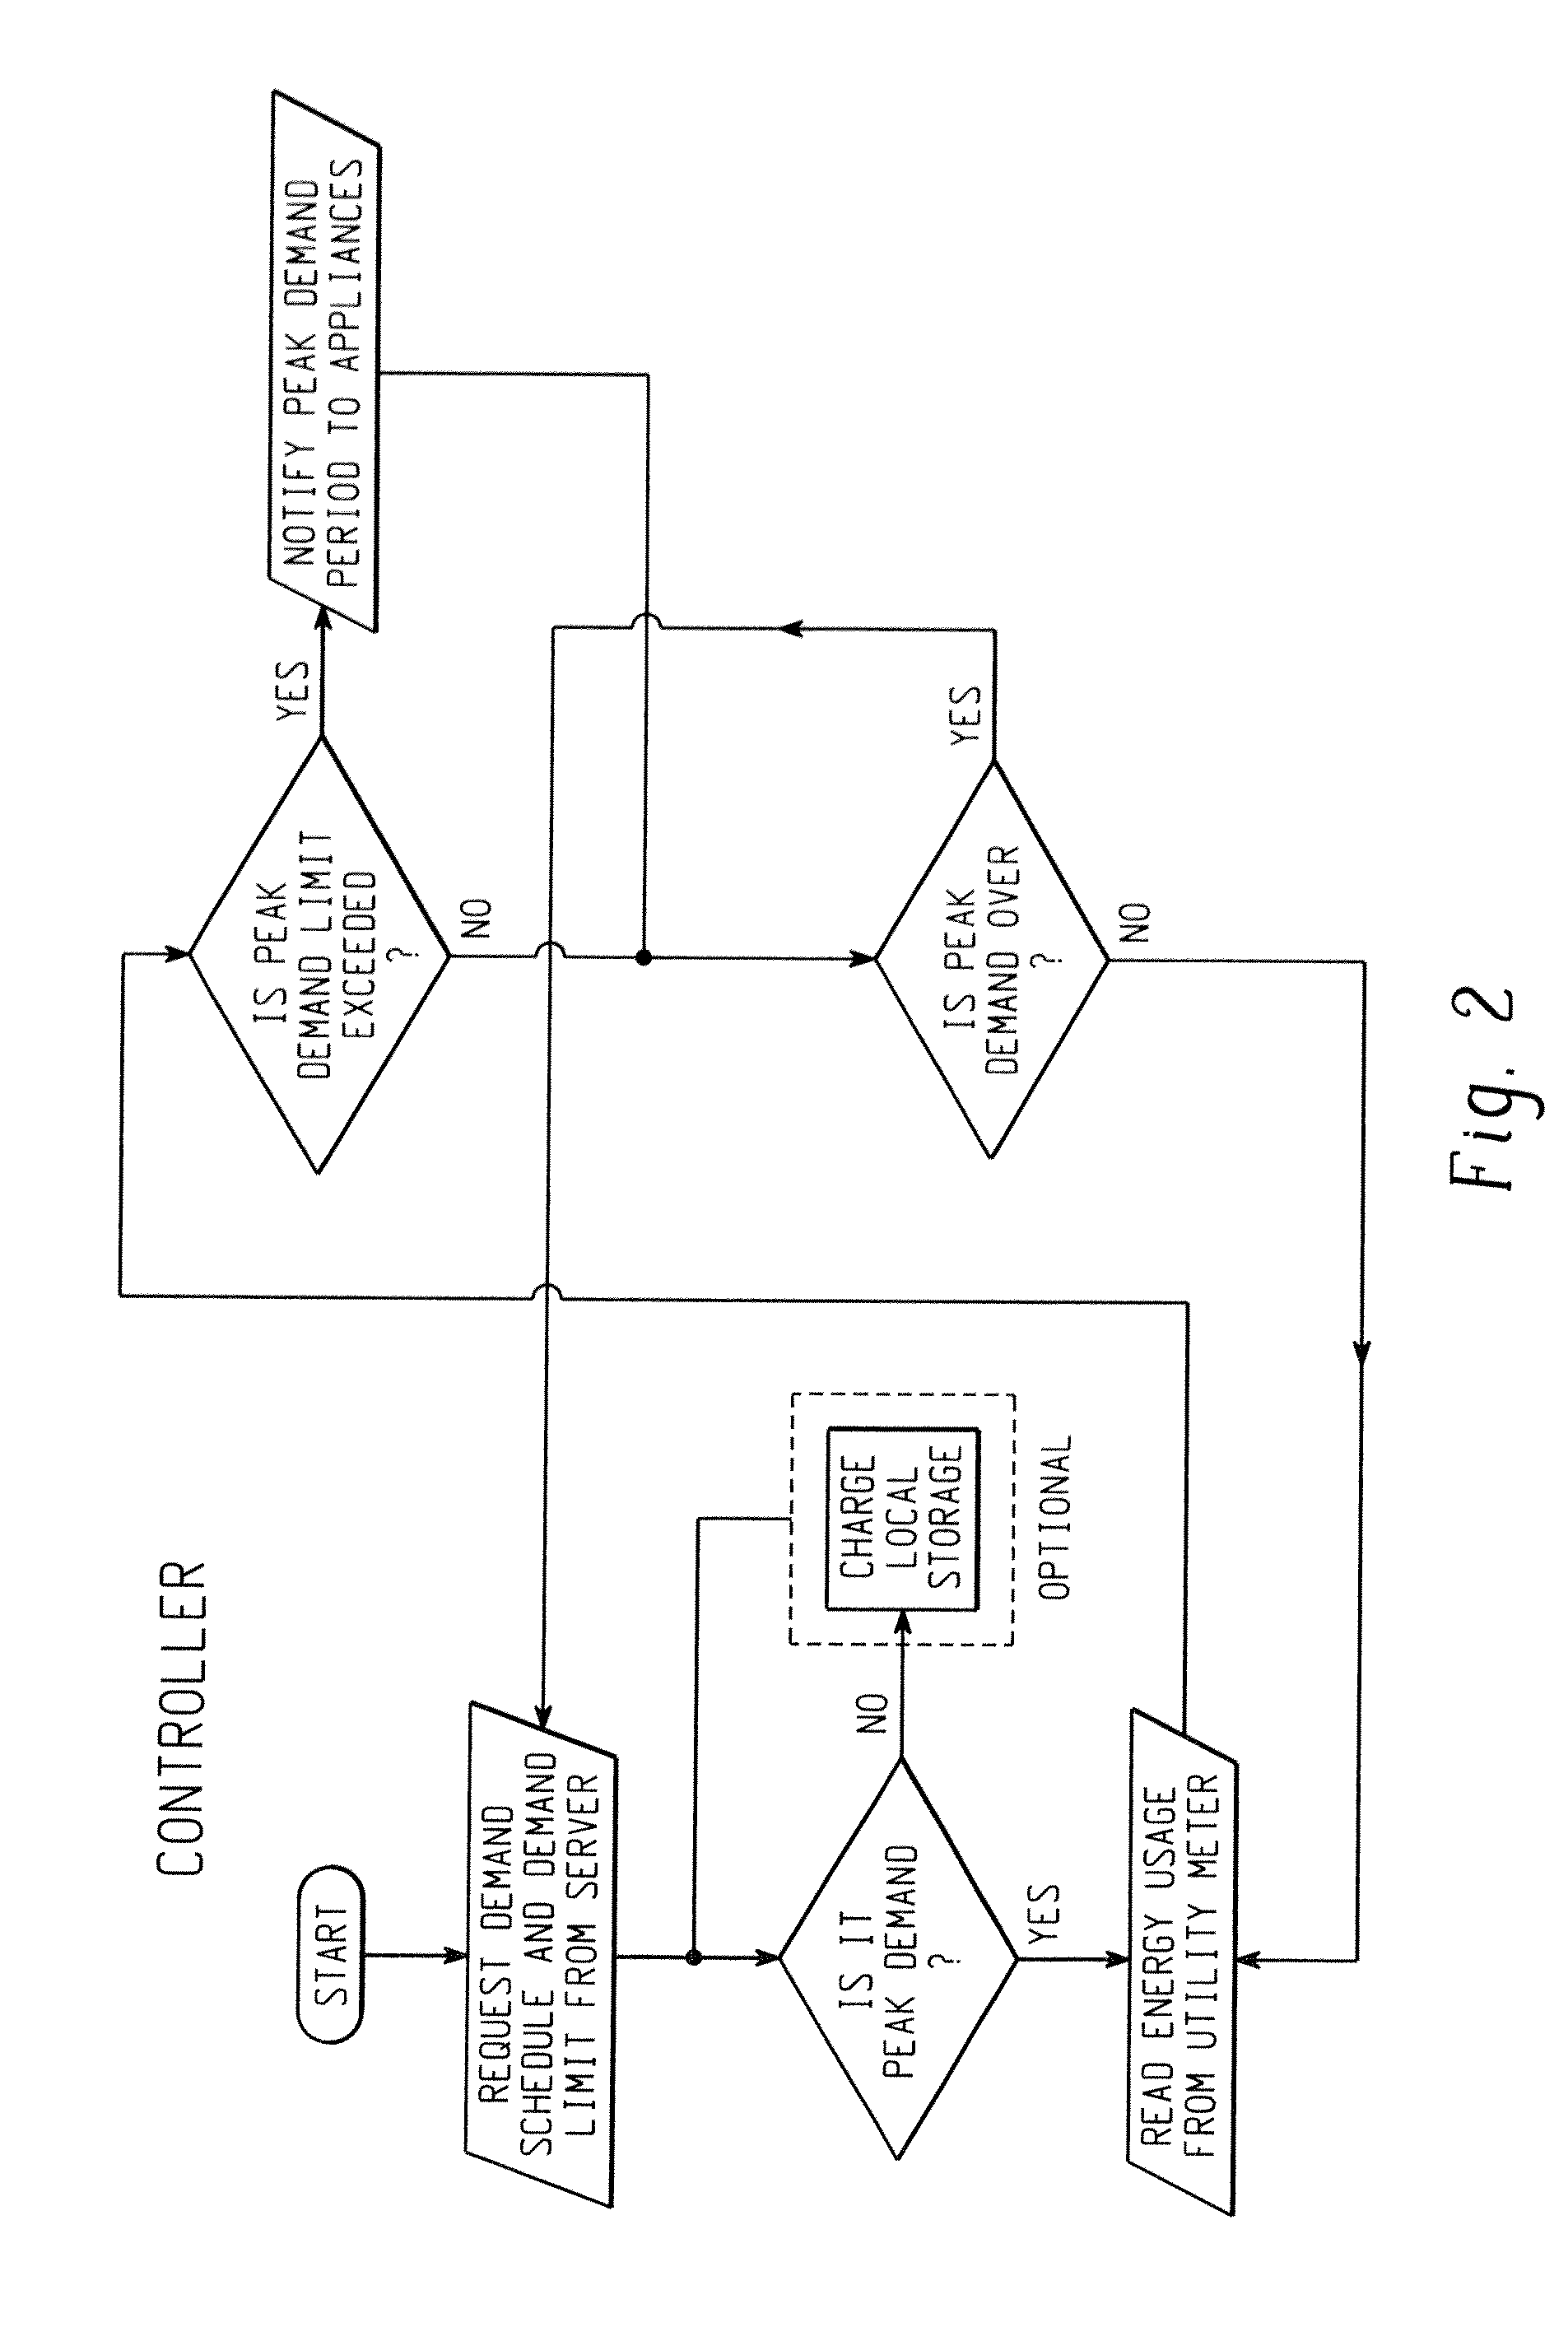 Controlling multiple smart appliances with a single communication interface